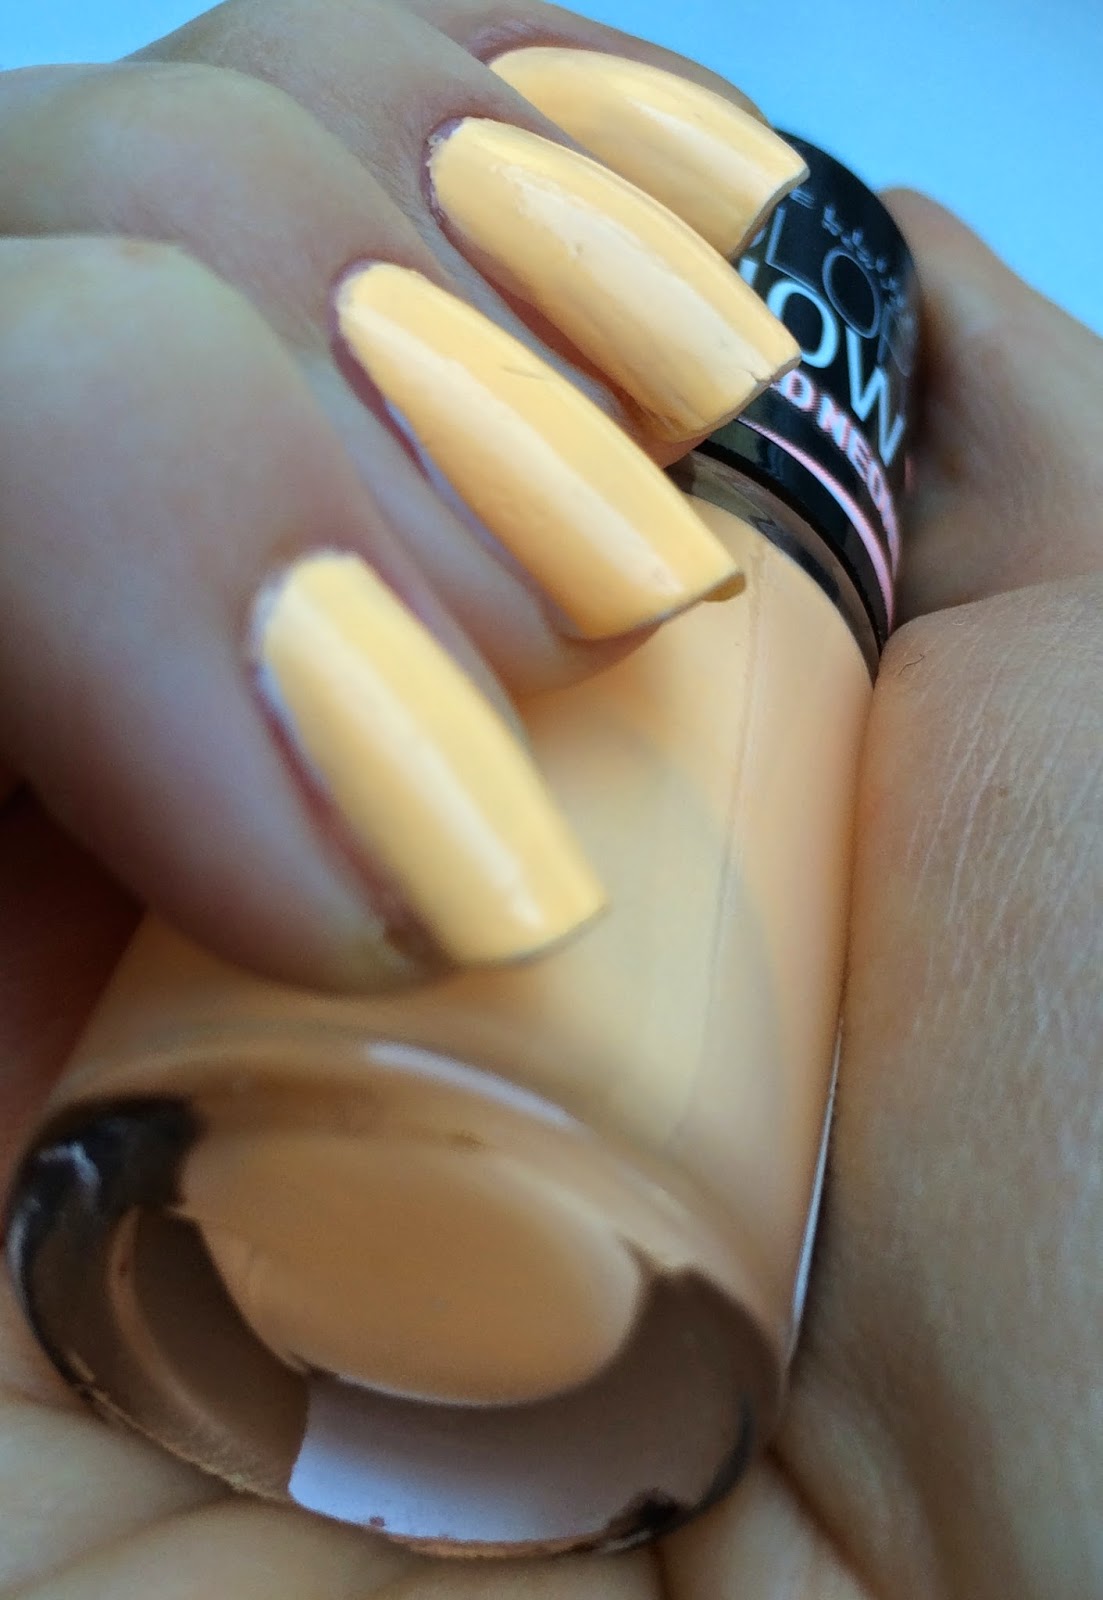 maybelline-bleached-neons-sun-flare-swatch